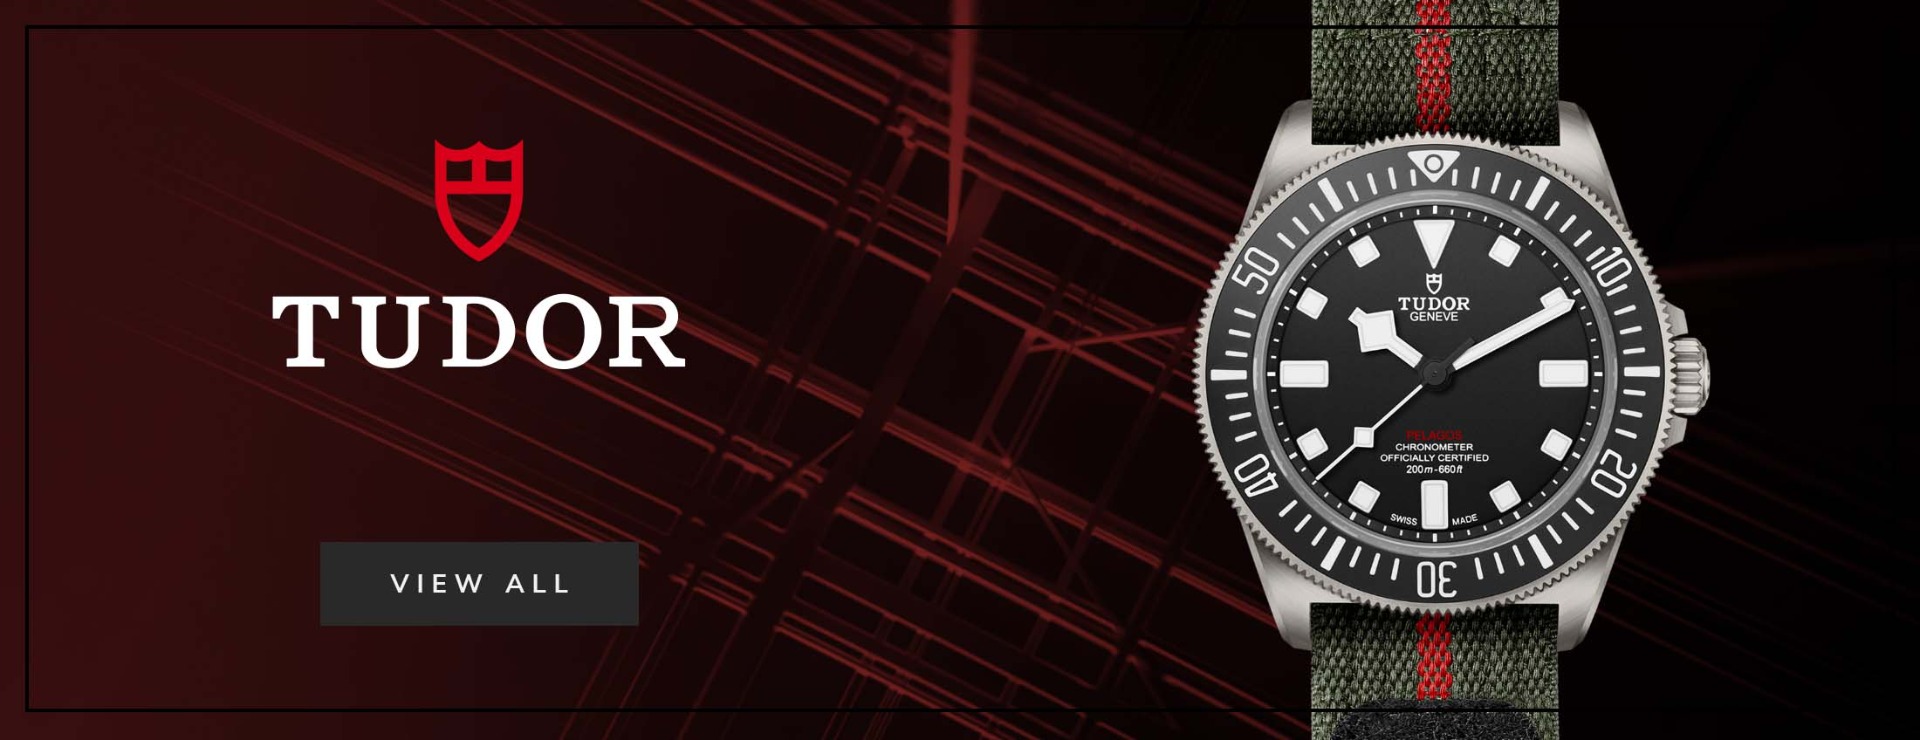 TUDOR watch with red and black background and the text Tudor Shop Now